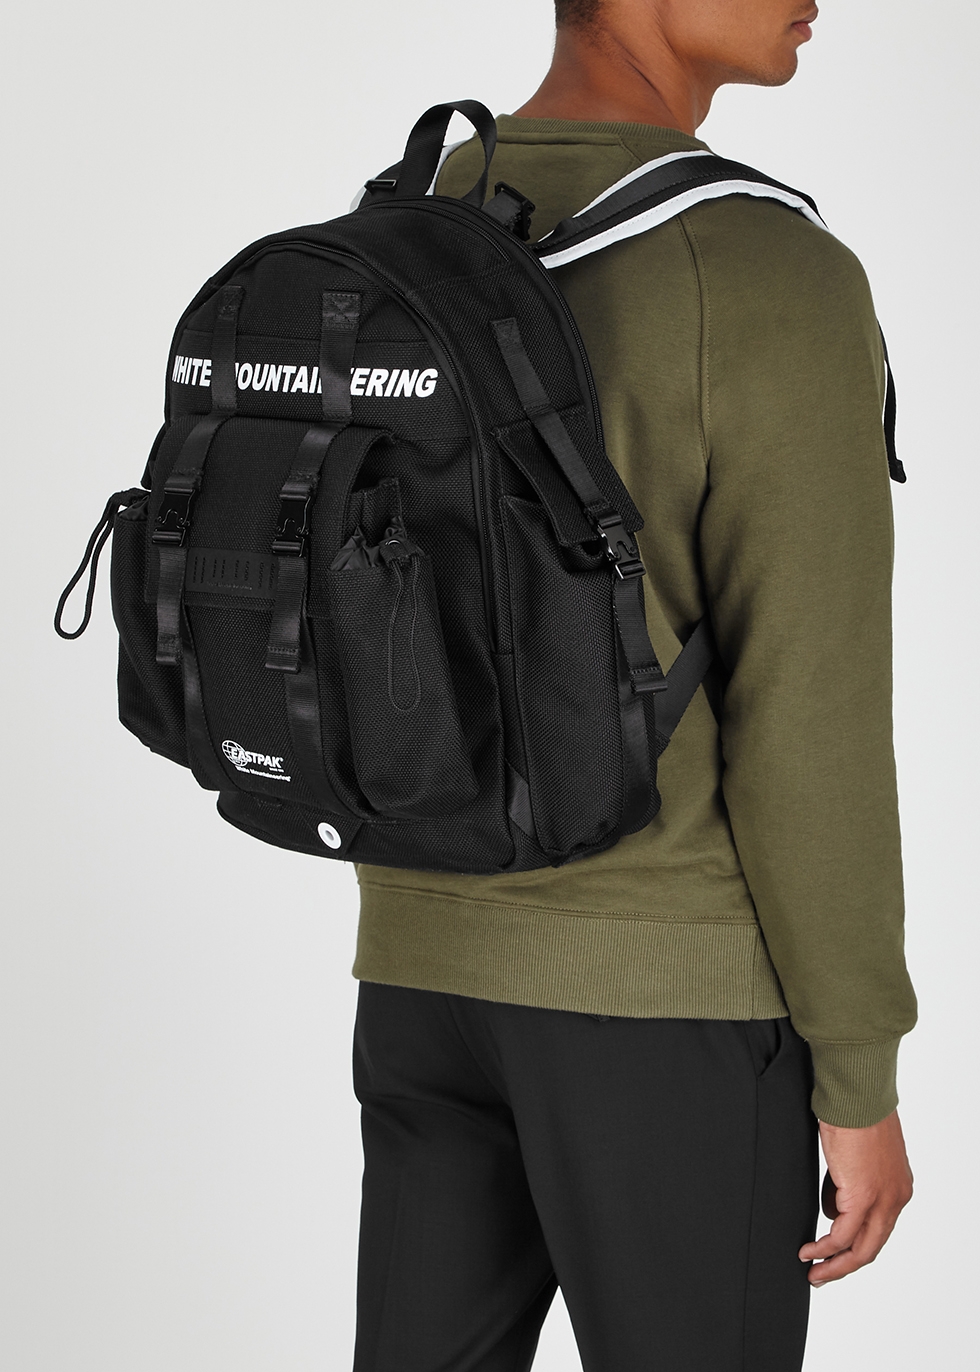 white mountaineering backpack